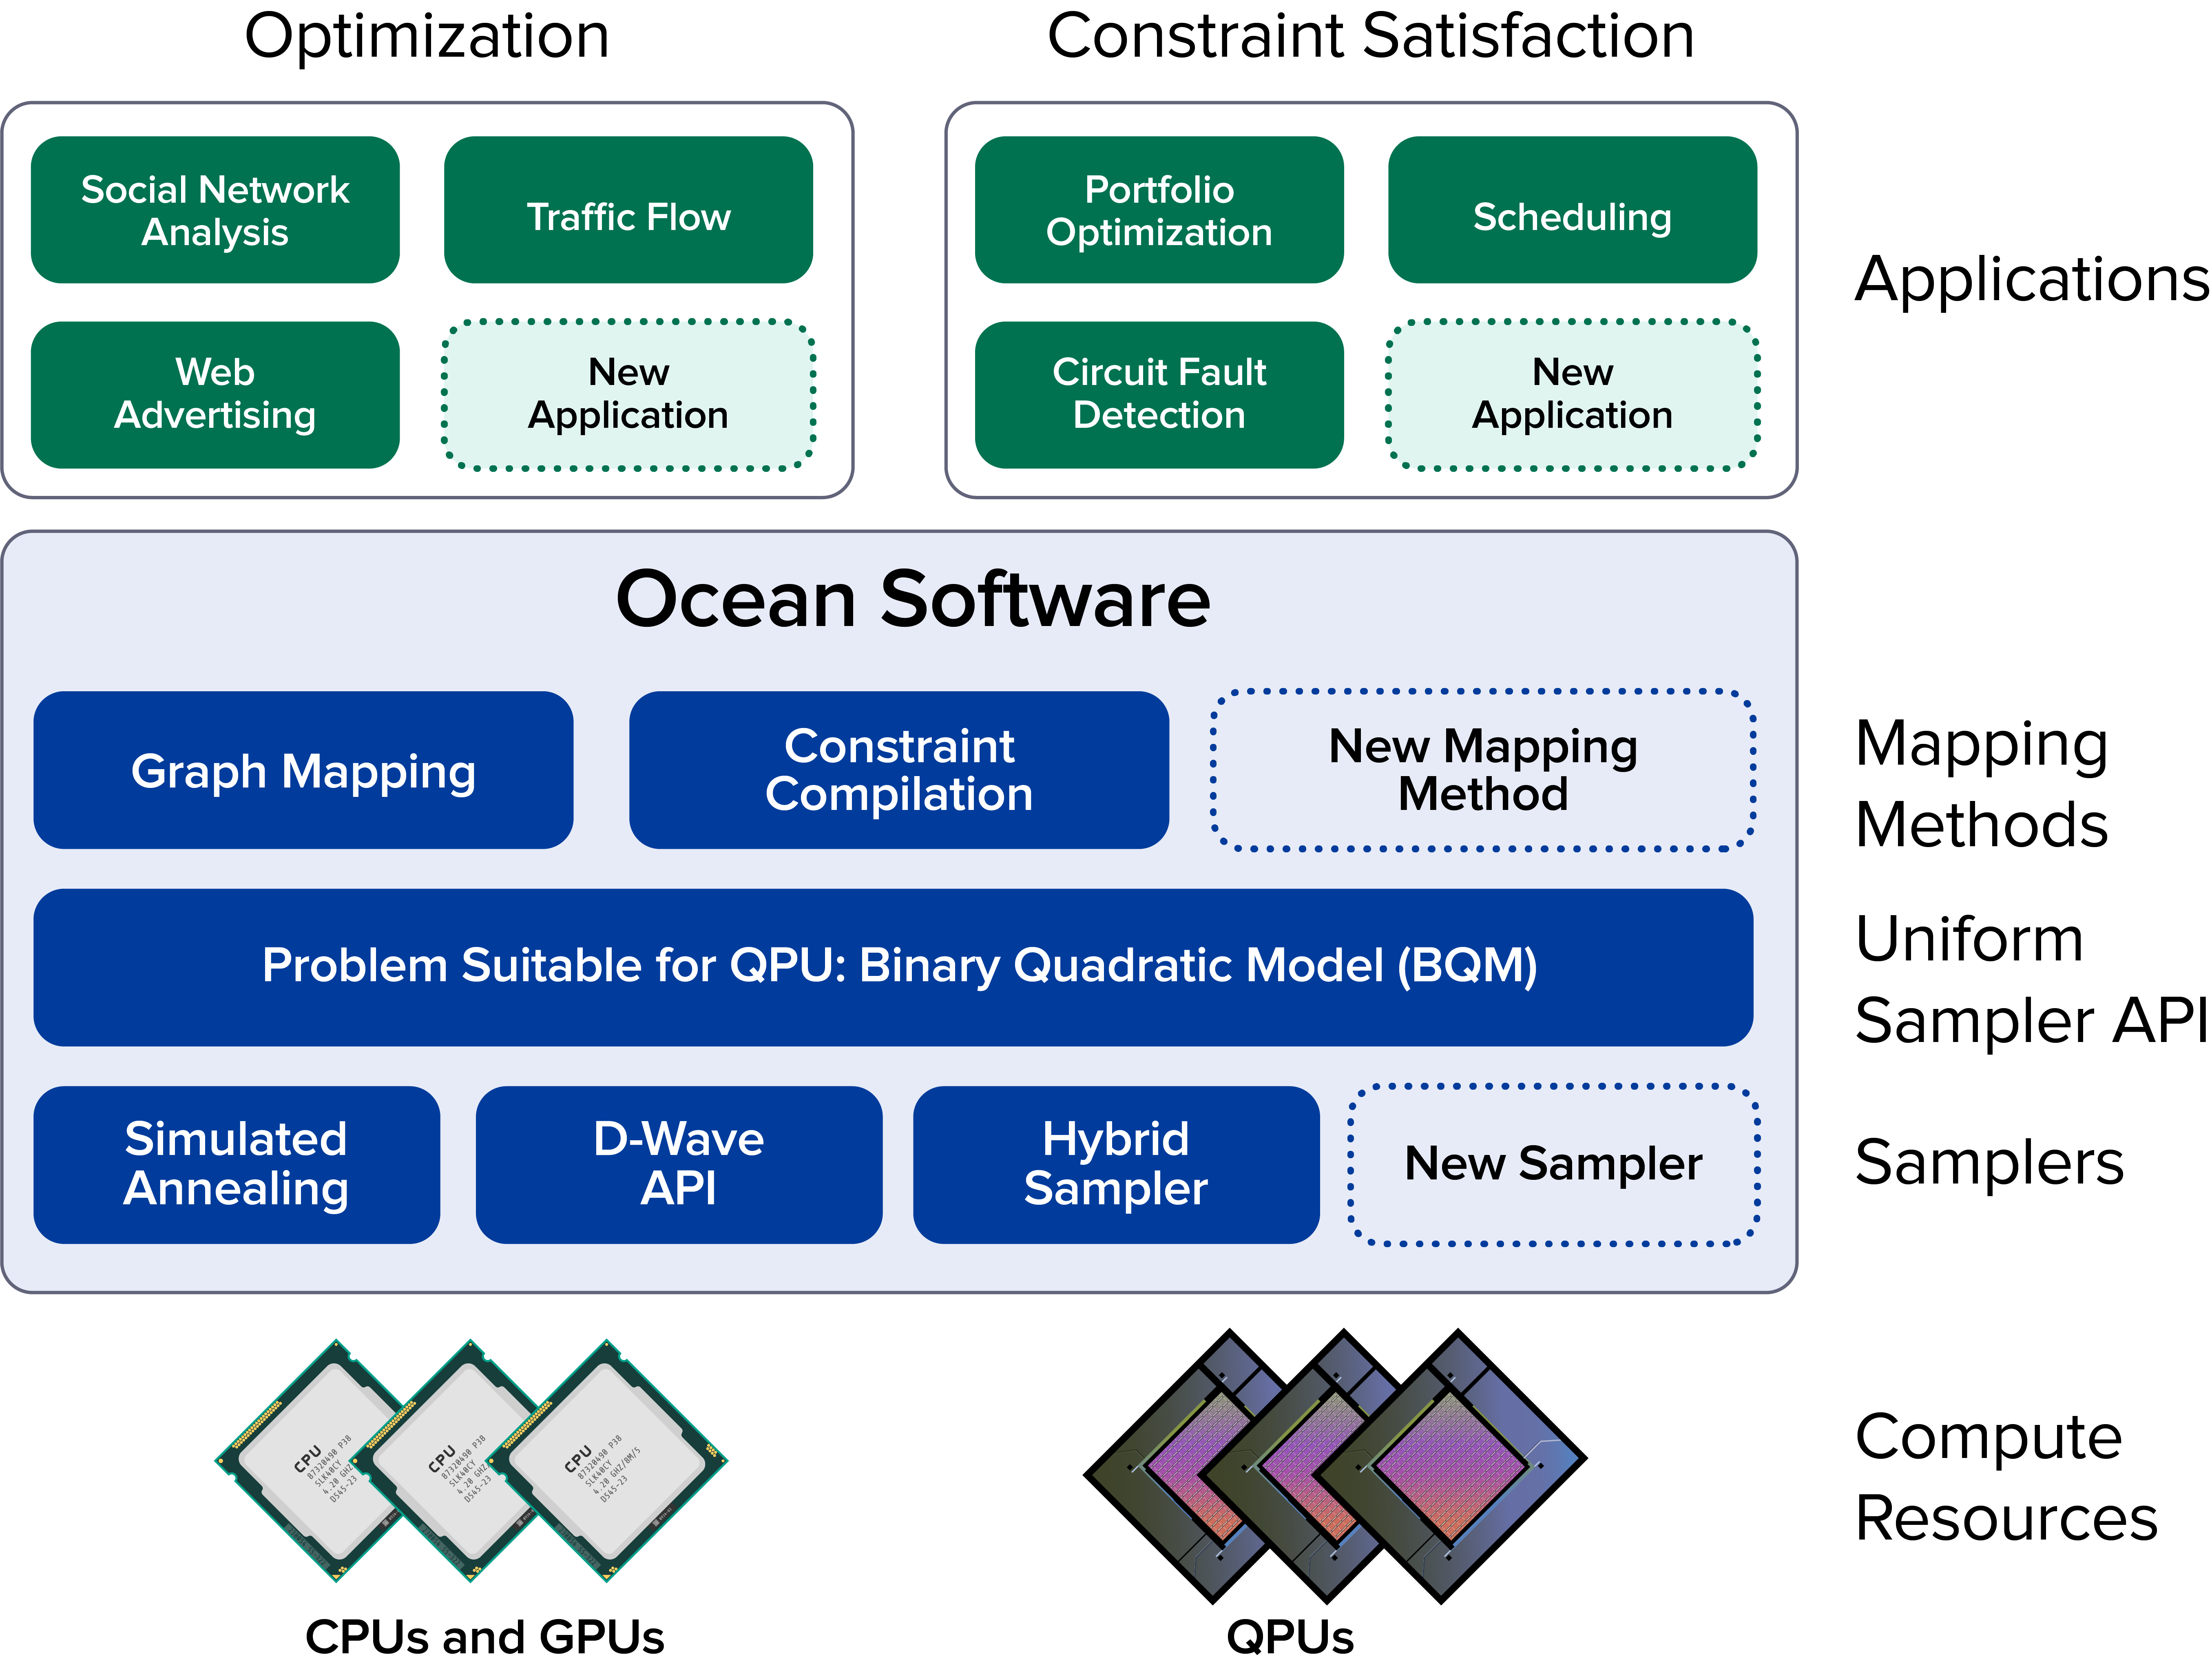 Overview of the software stack.